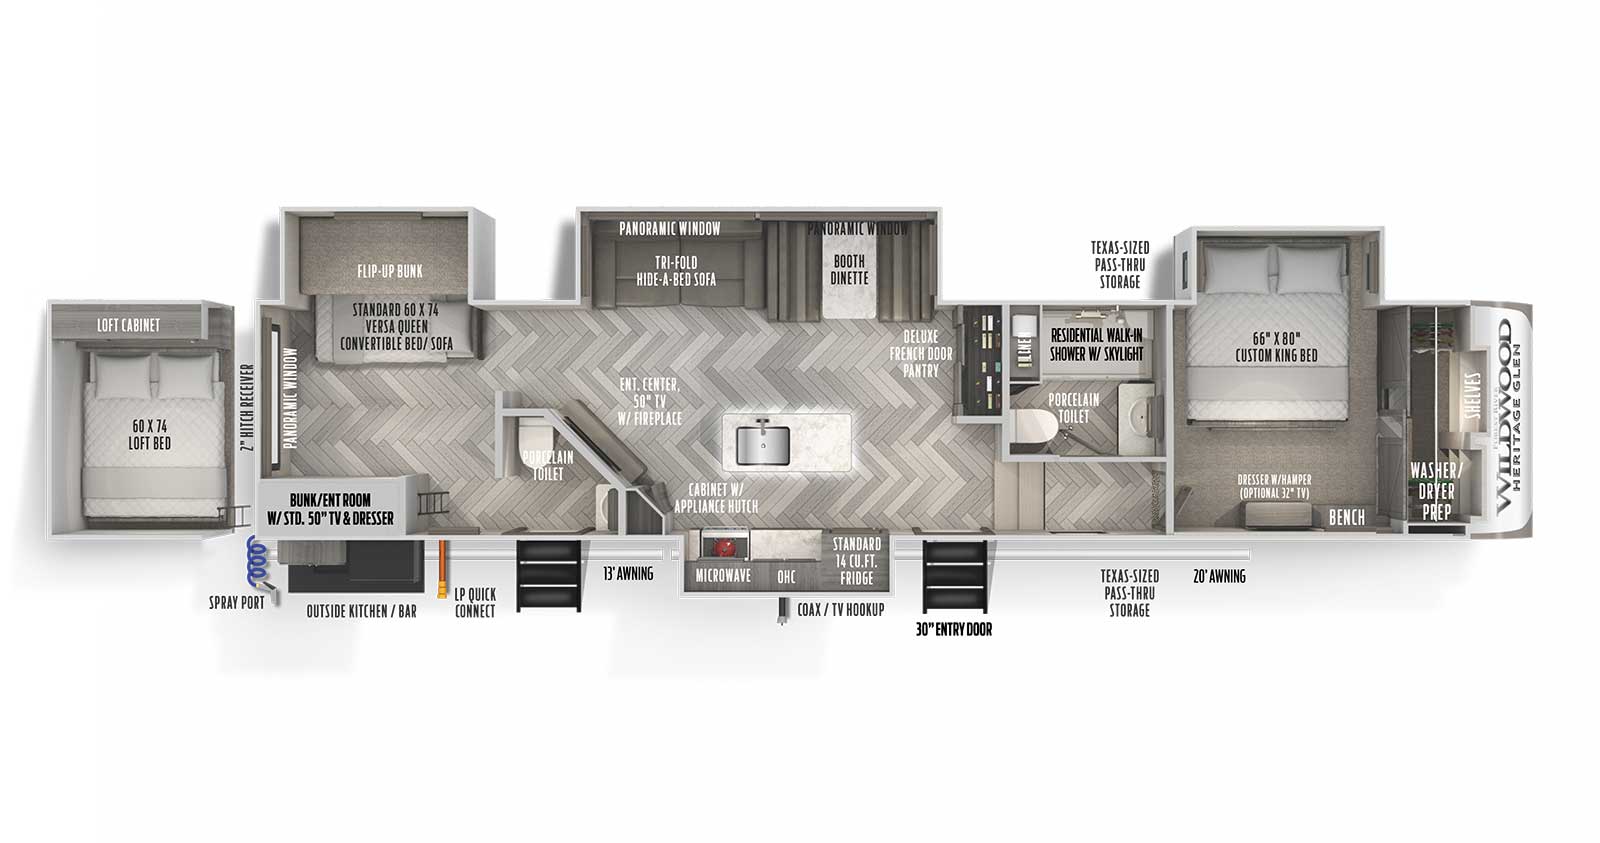 Heritage Glen 353BED floorplan. The 353BED has 4 slide outs and two plus entry doors.